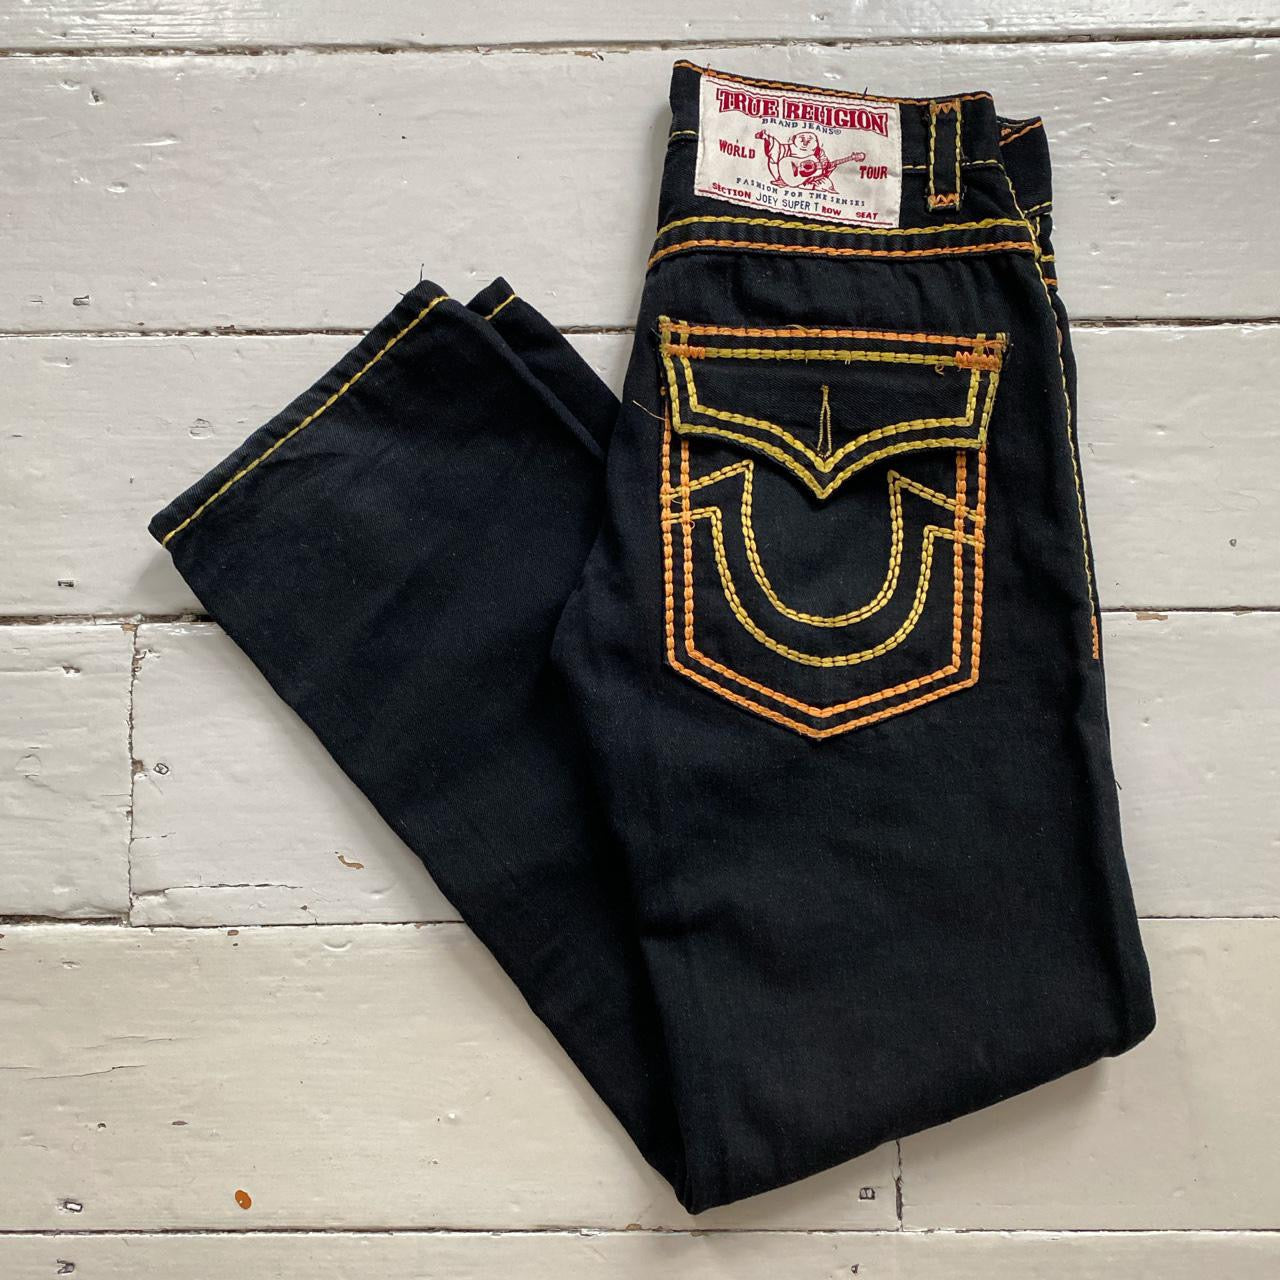 True Religion Black Joey Super T Big Double Stitch Yellow and Gold Jeans (32/30)